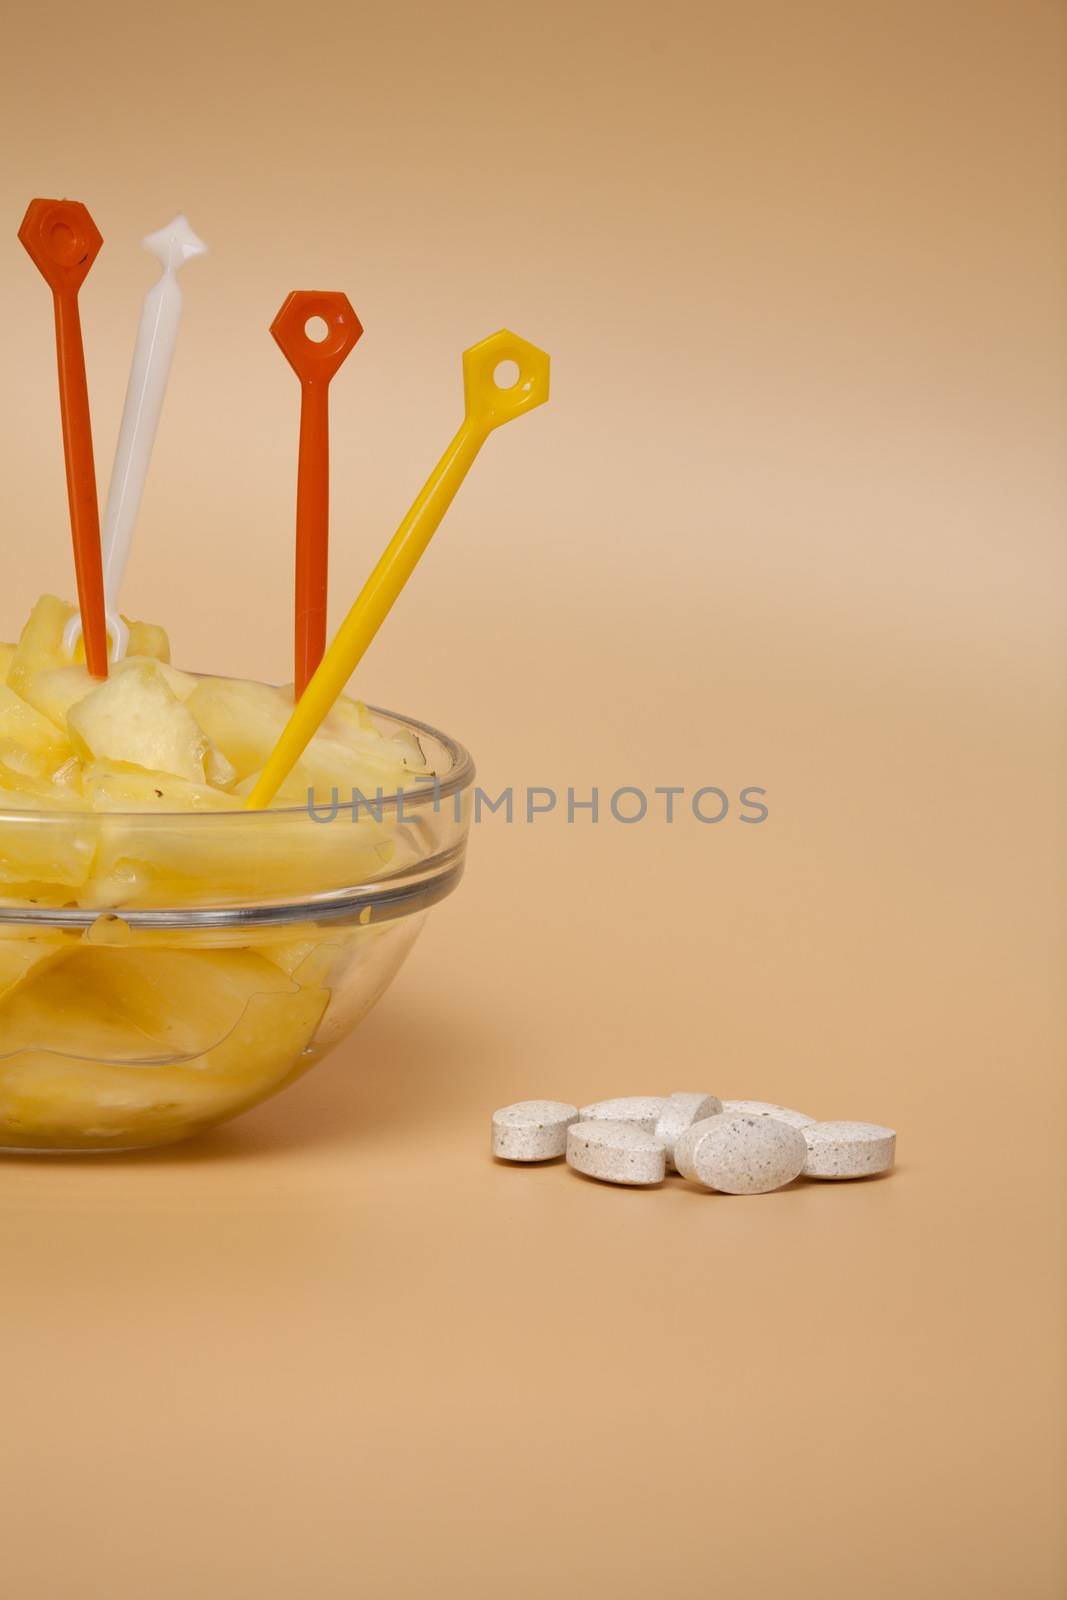 cup filled with pineapple slices handful of pills by mrivserg